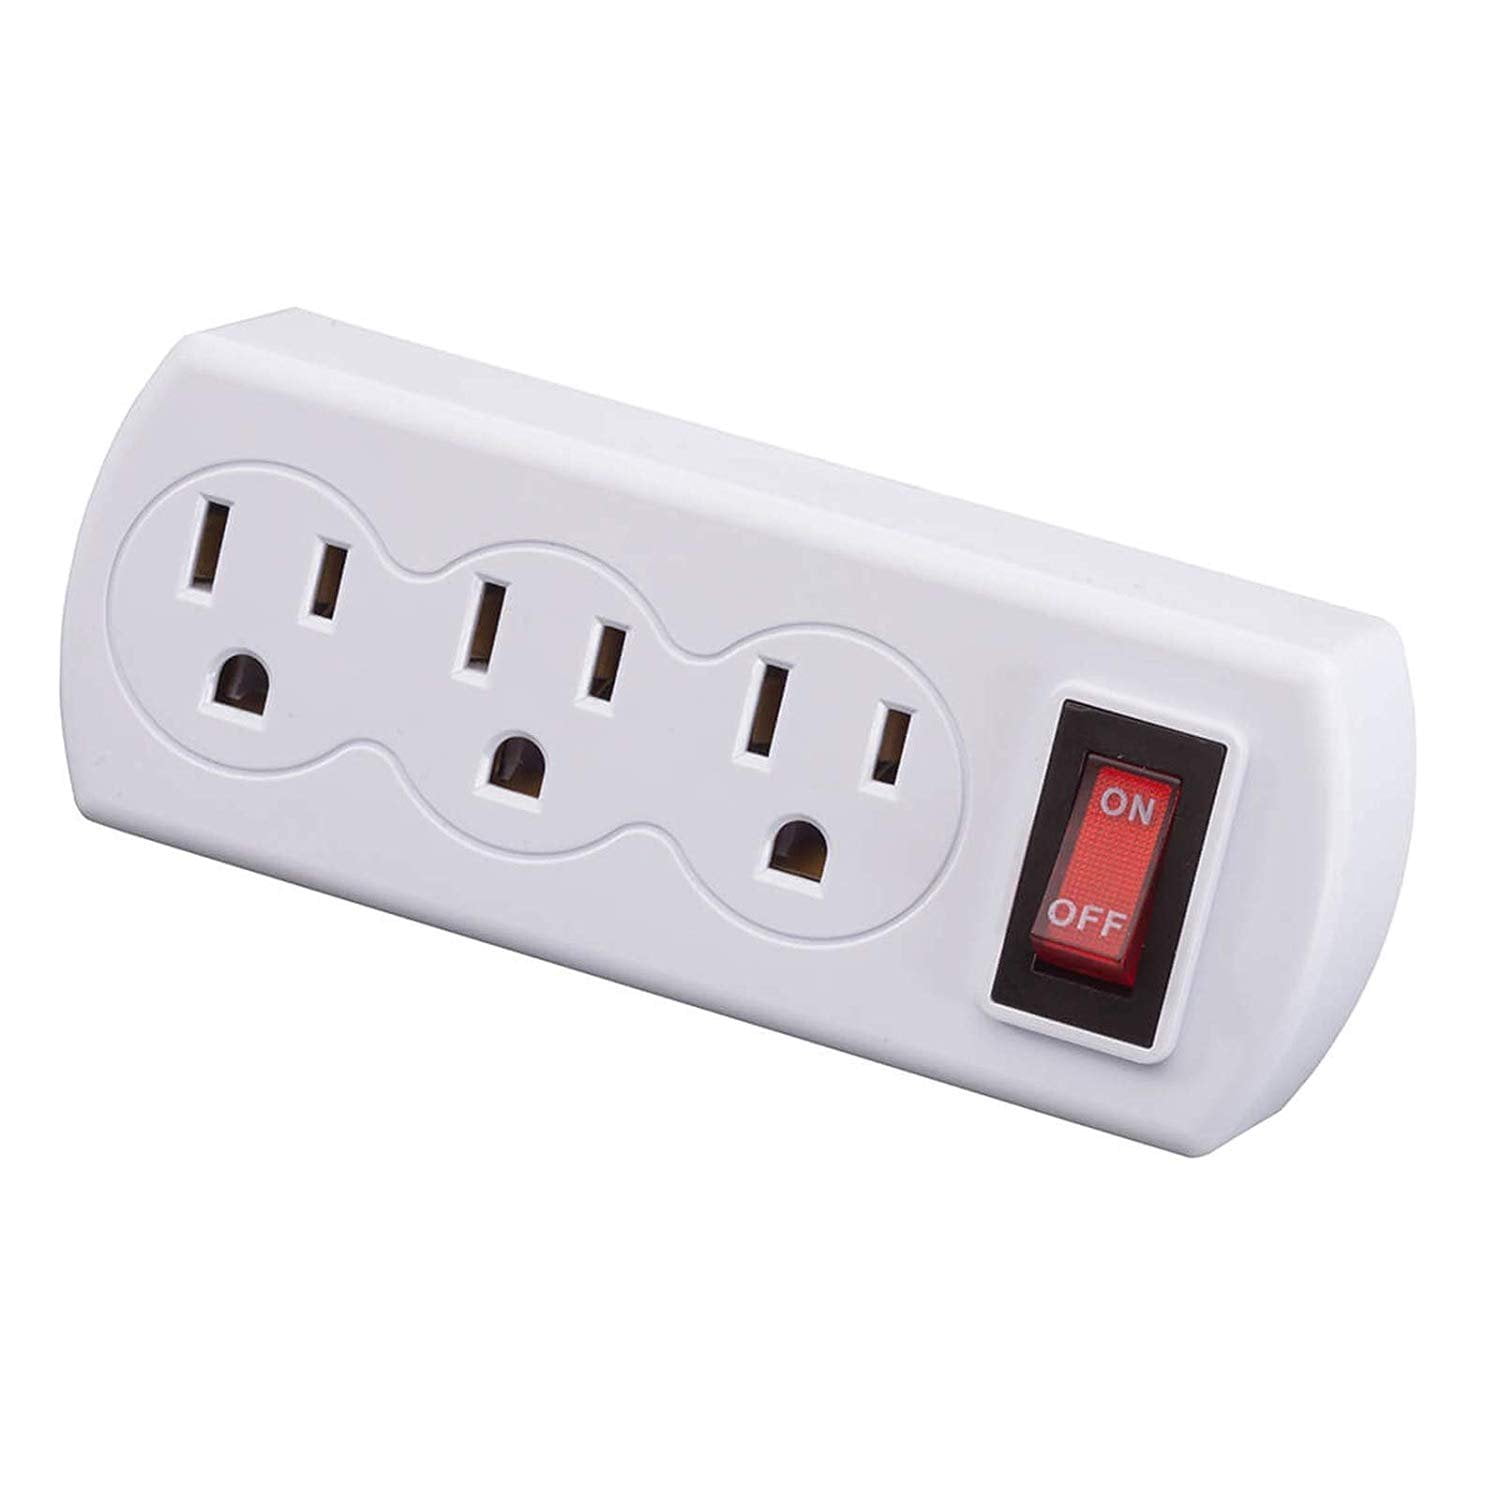 Wideskall 3 Prong Grounded 3 Outlets AC Power Wall Switch Tap Adapter ETL Certified Pack of 1 Walmart.com